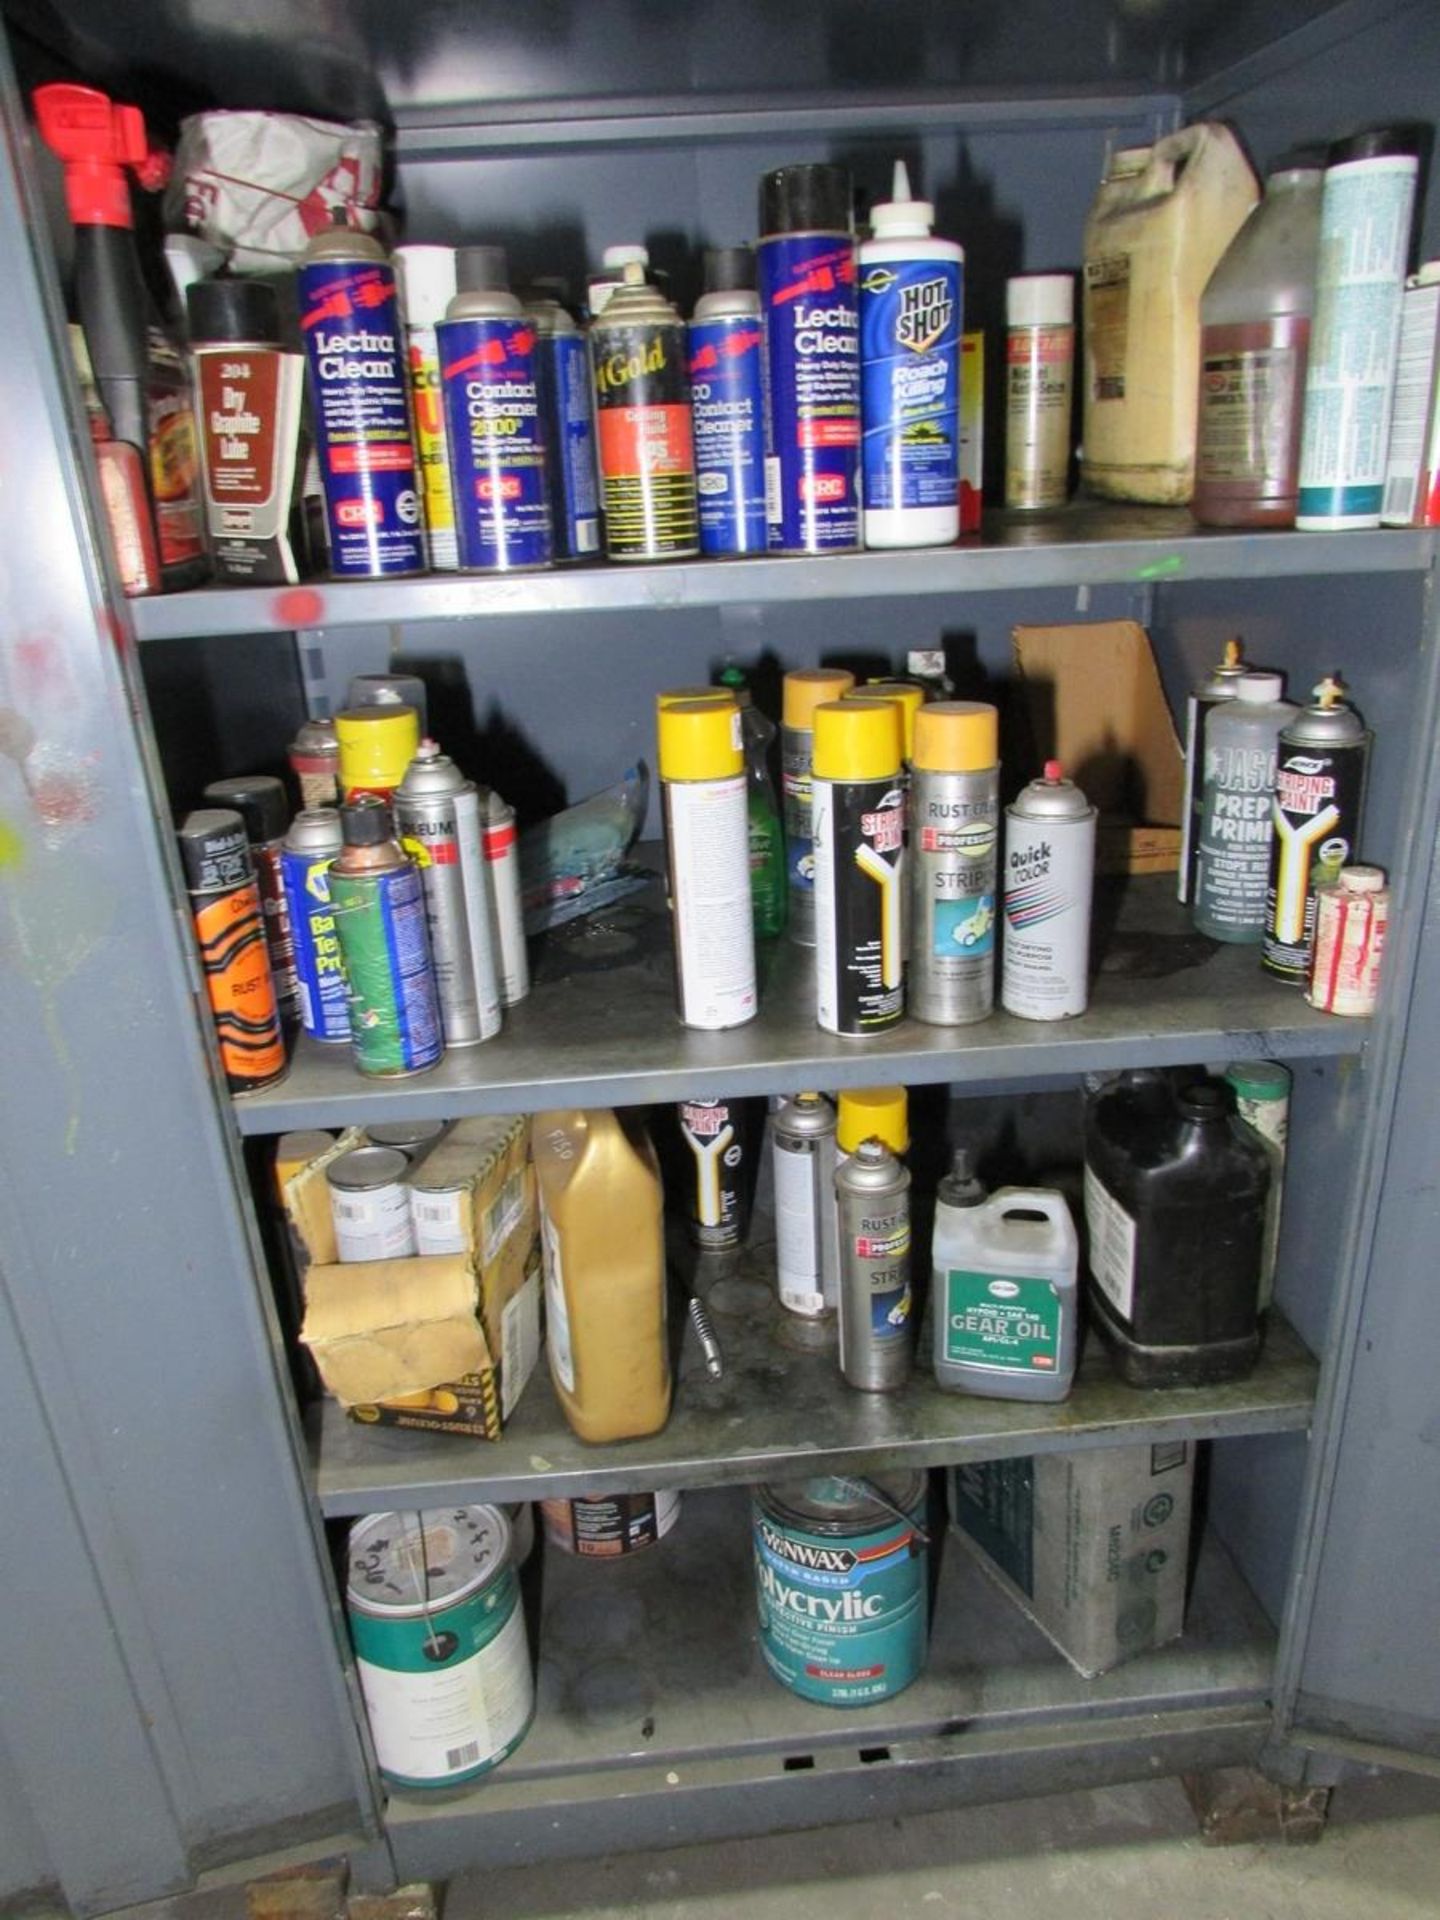 LOT - (2) 2-DOOR CABINETS, W/ CONTENTS: ASSORTED PAINT SUPPLIES, BATHROOM FACILITY PARTS, ETC. - Image 4 of 8